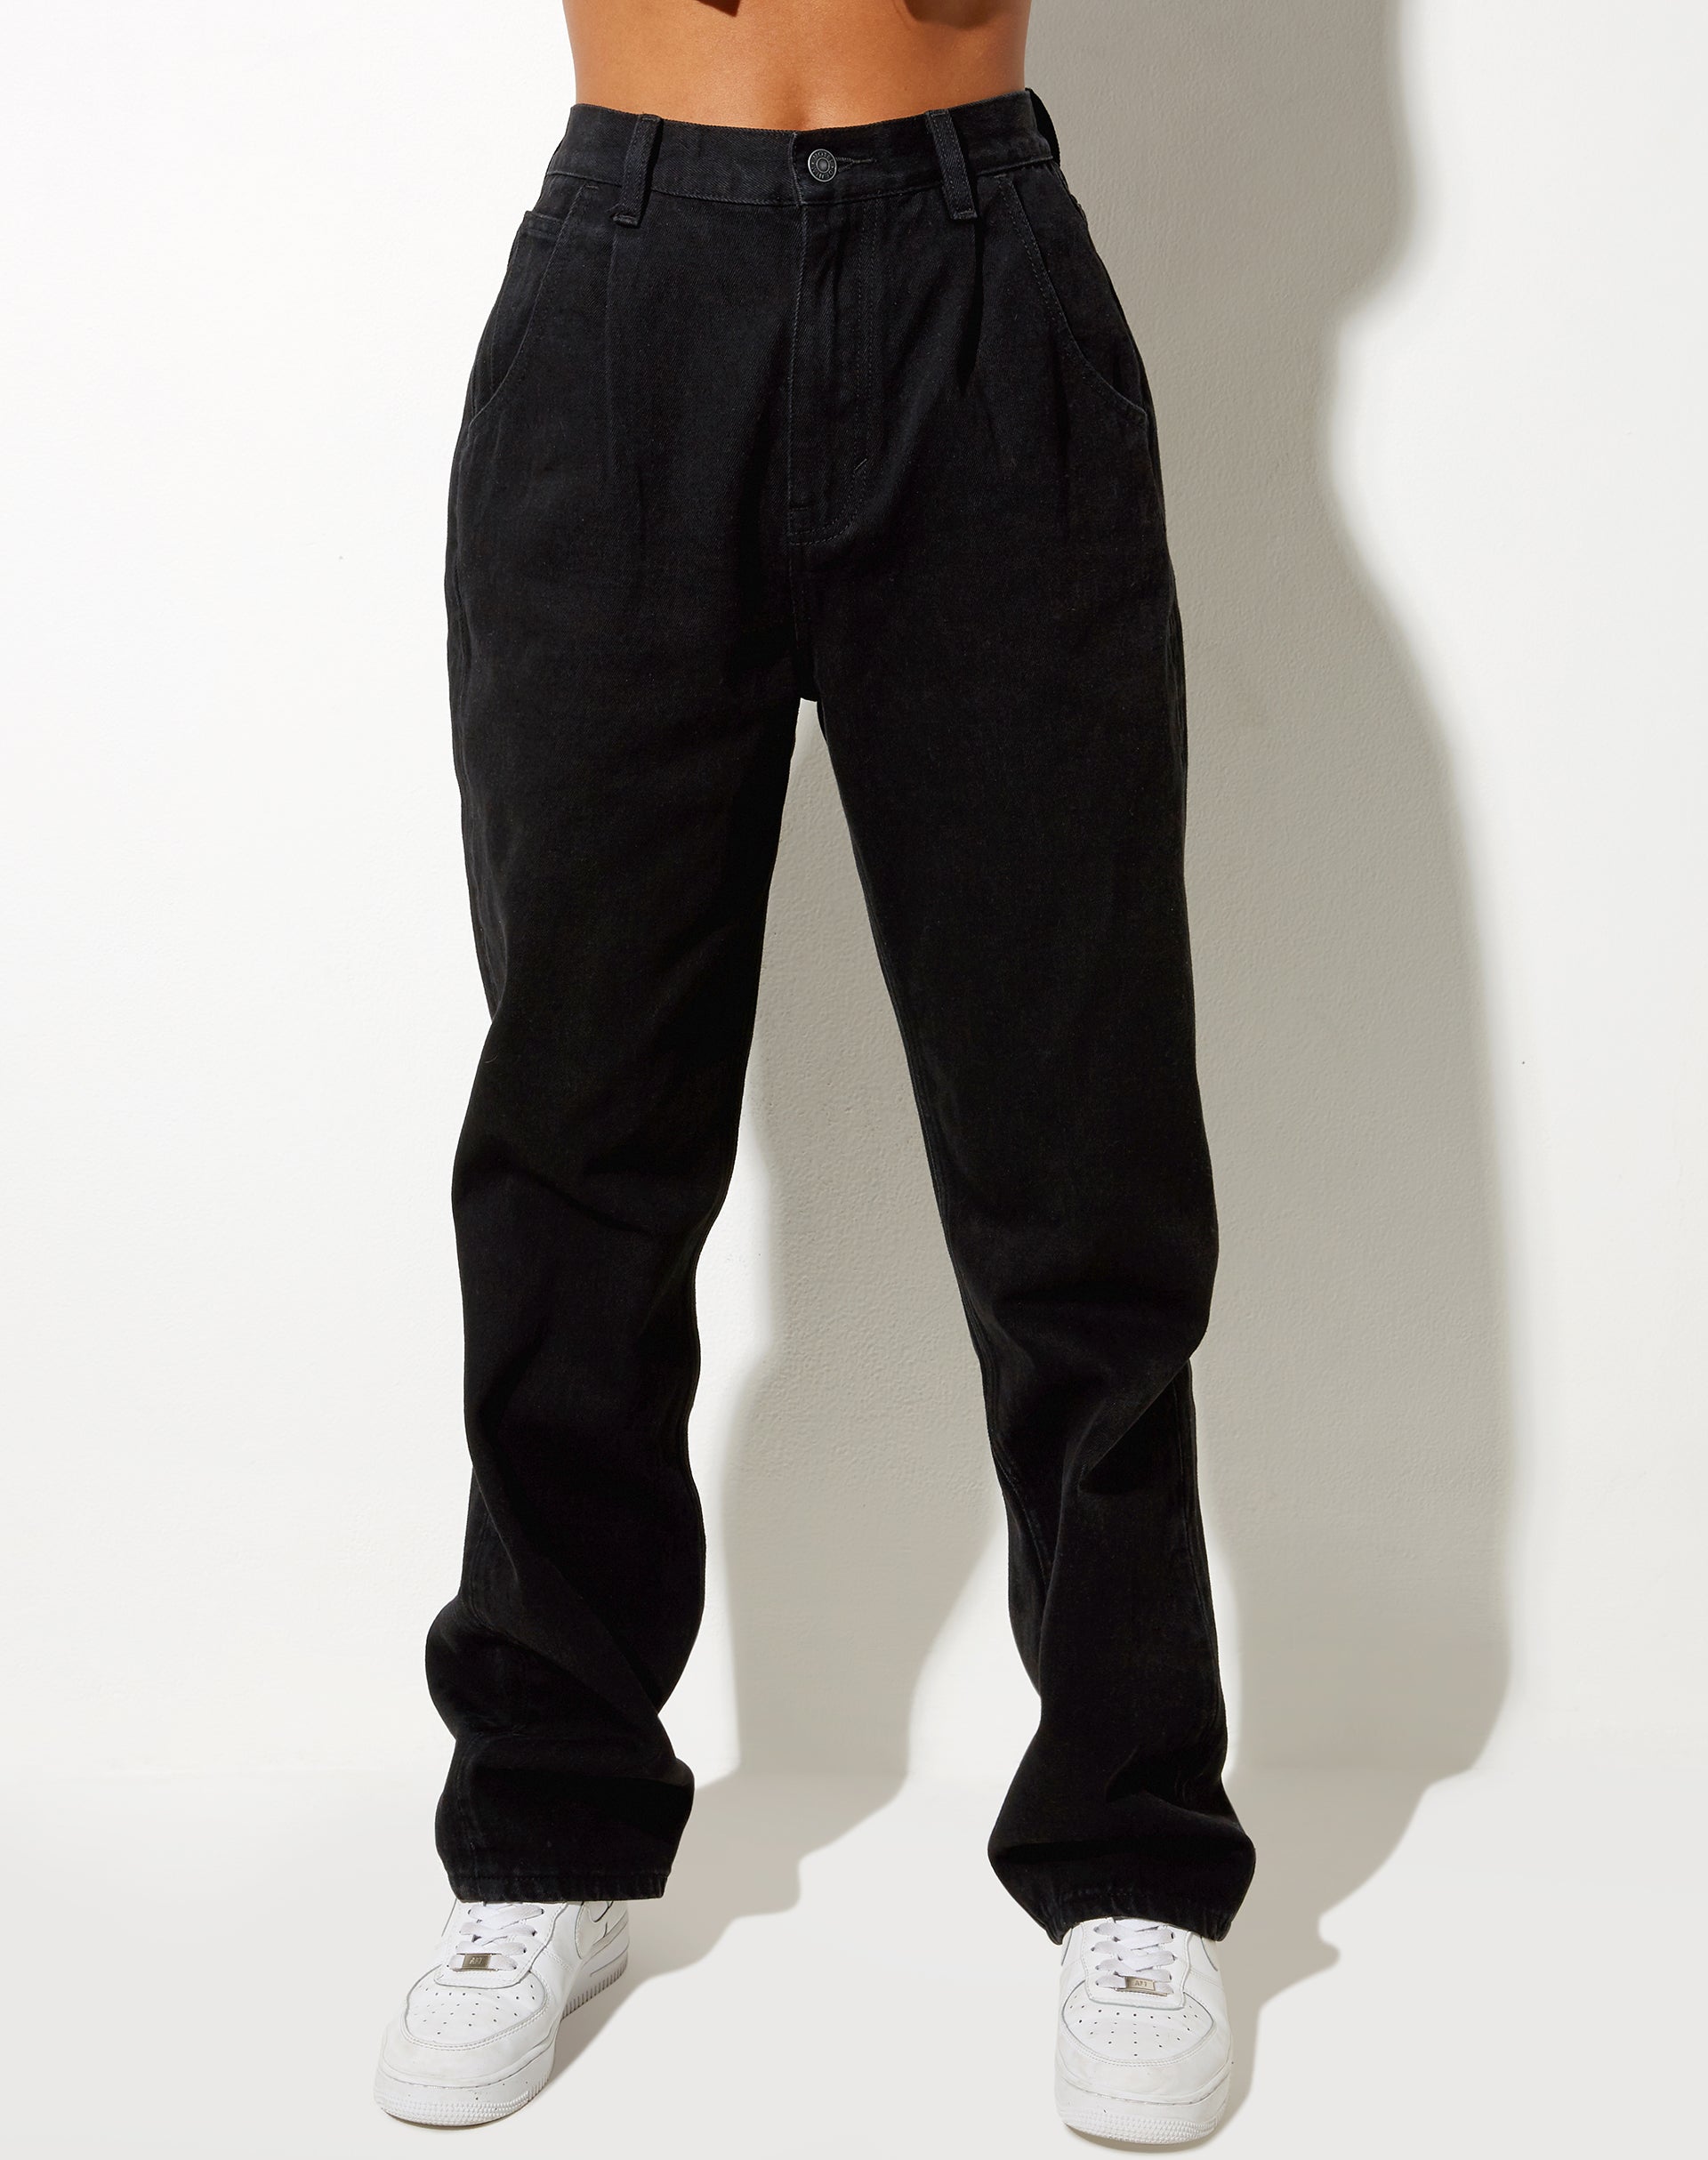 Image of Pleated Jeans in Black Wash